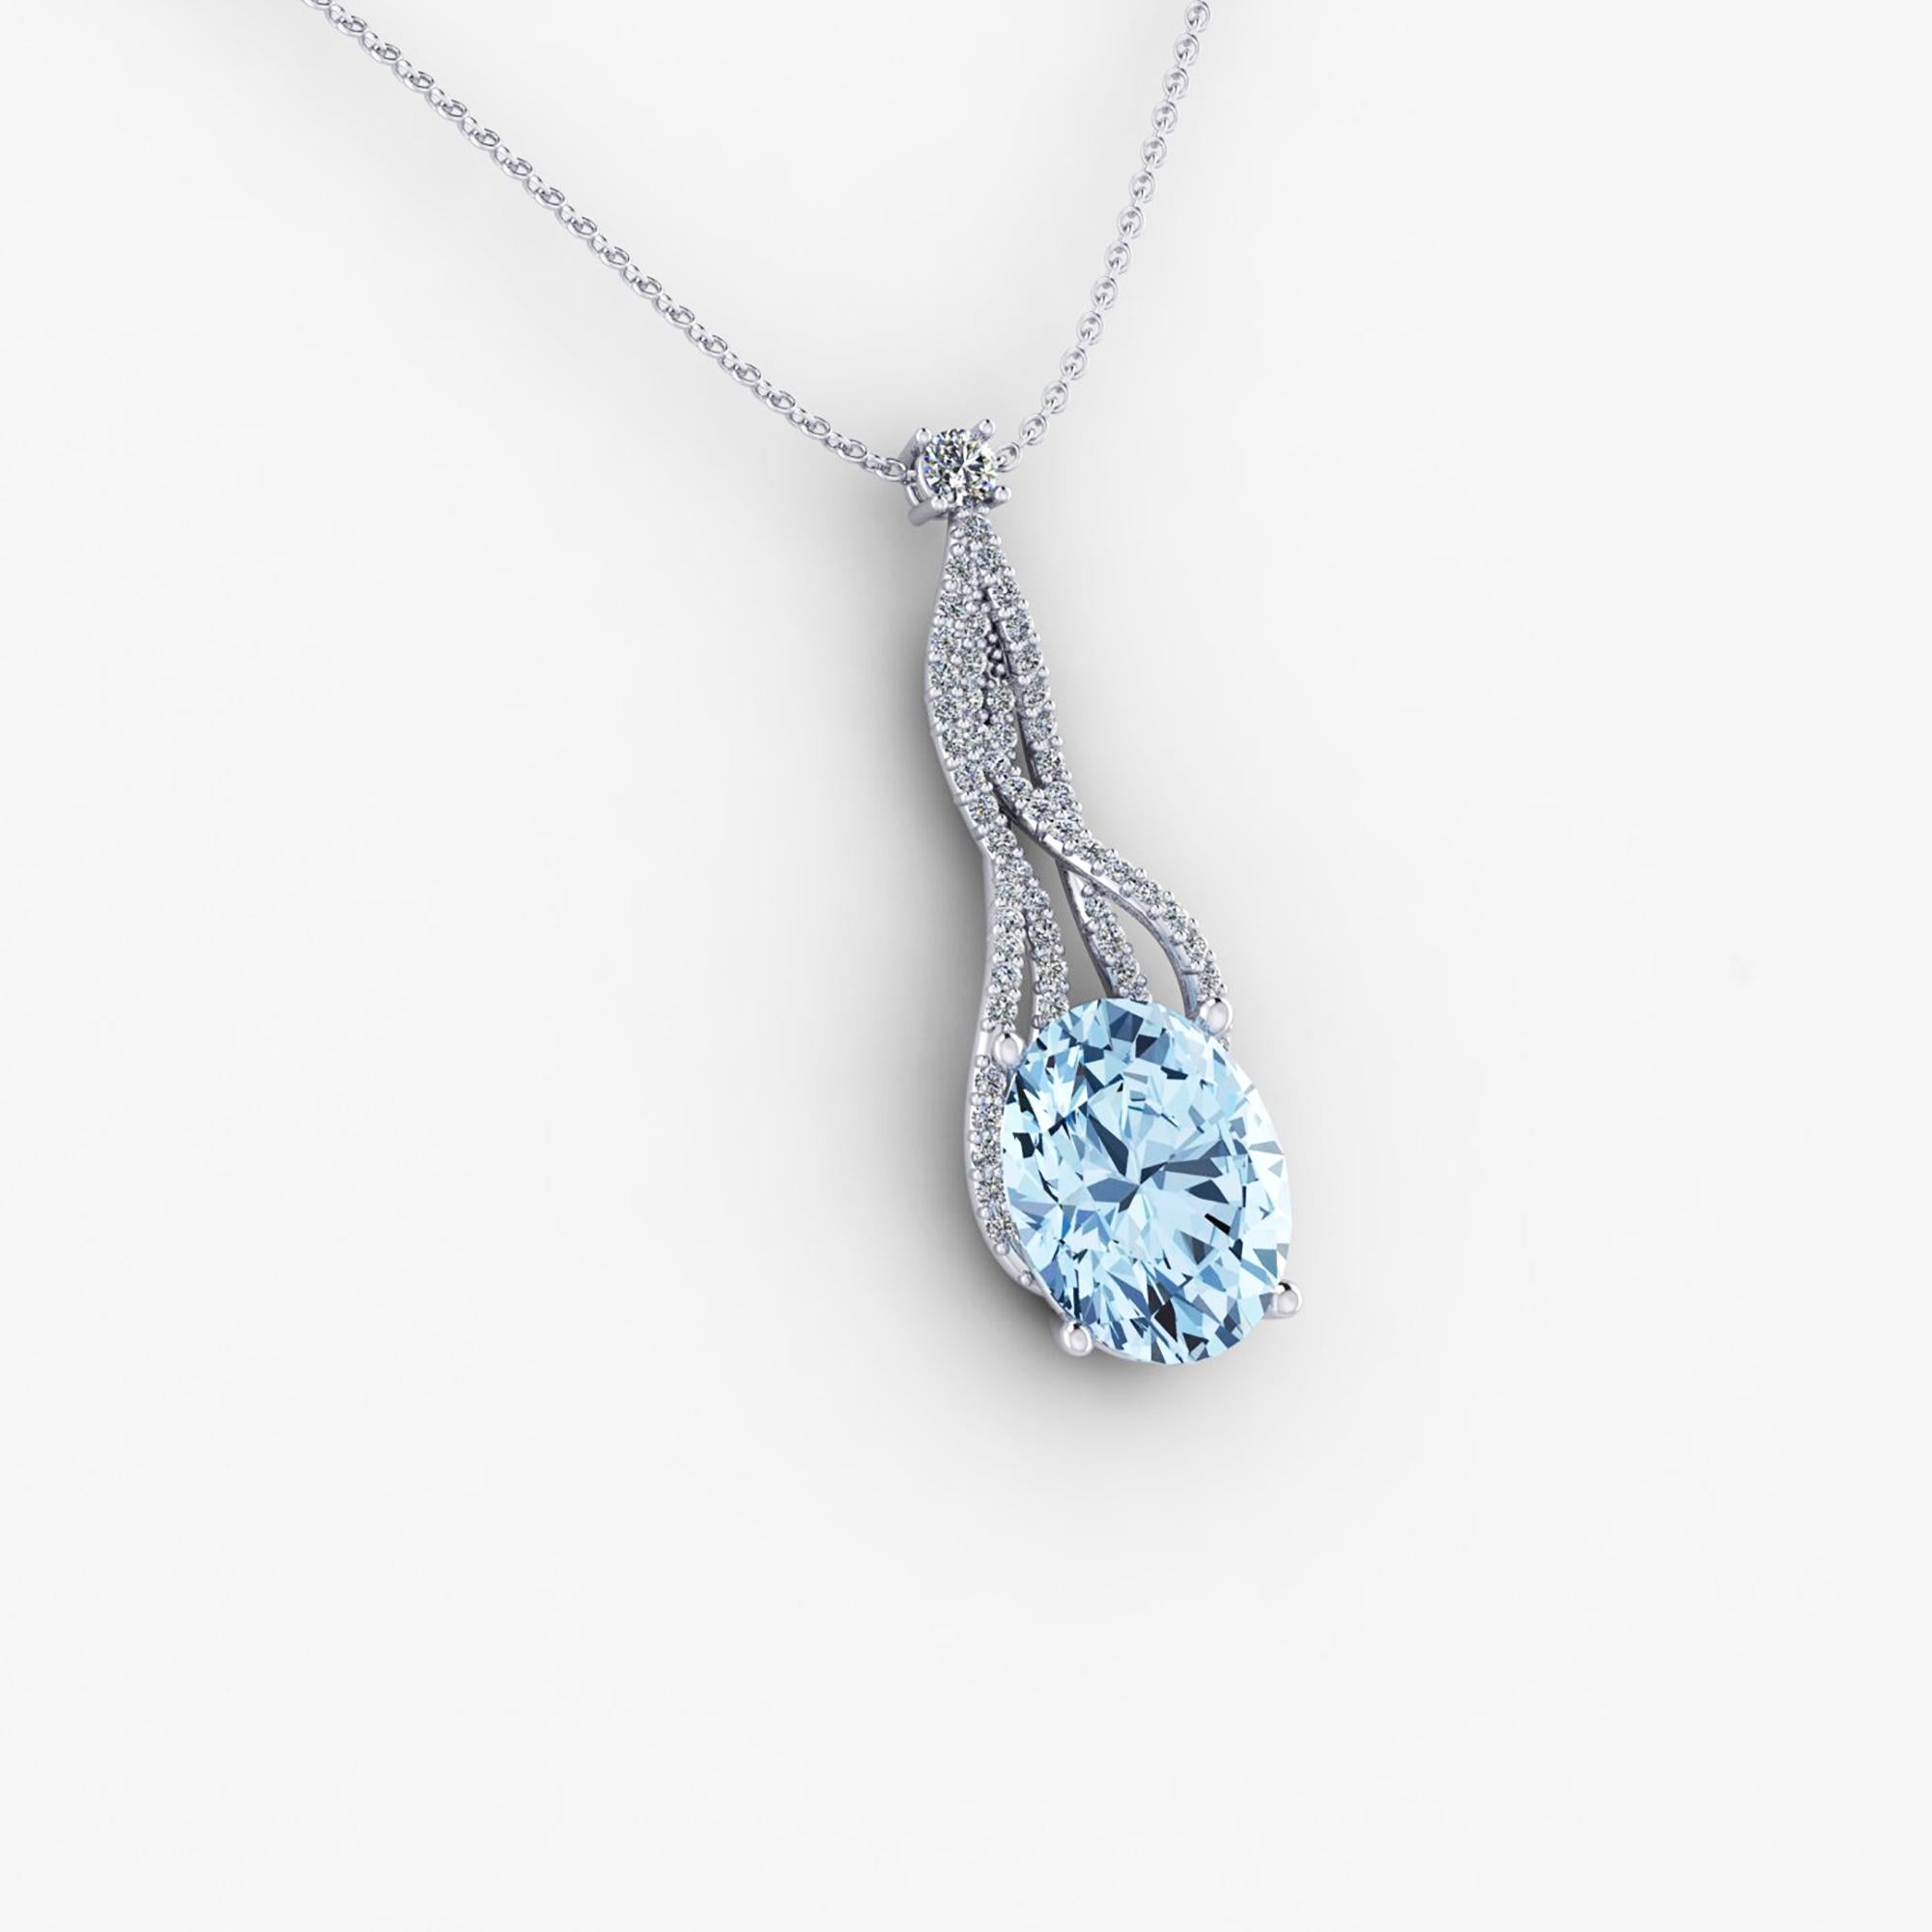 waterfall pendant necklace